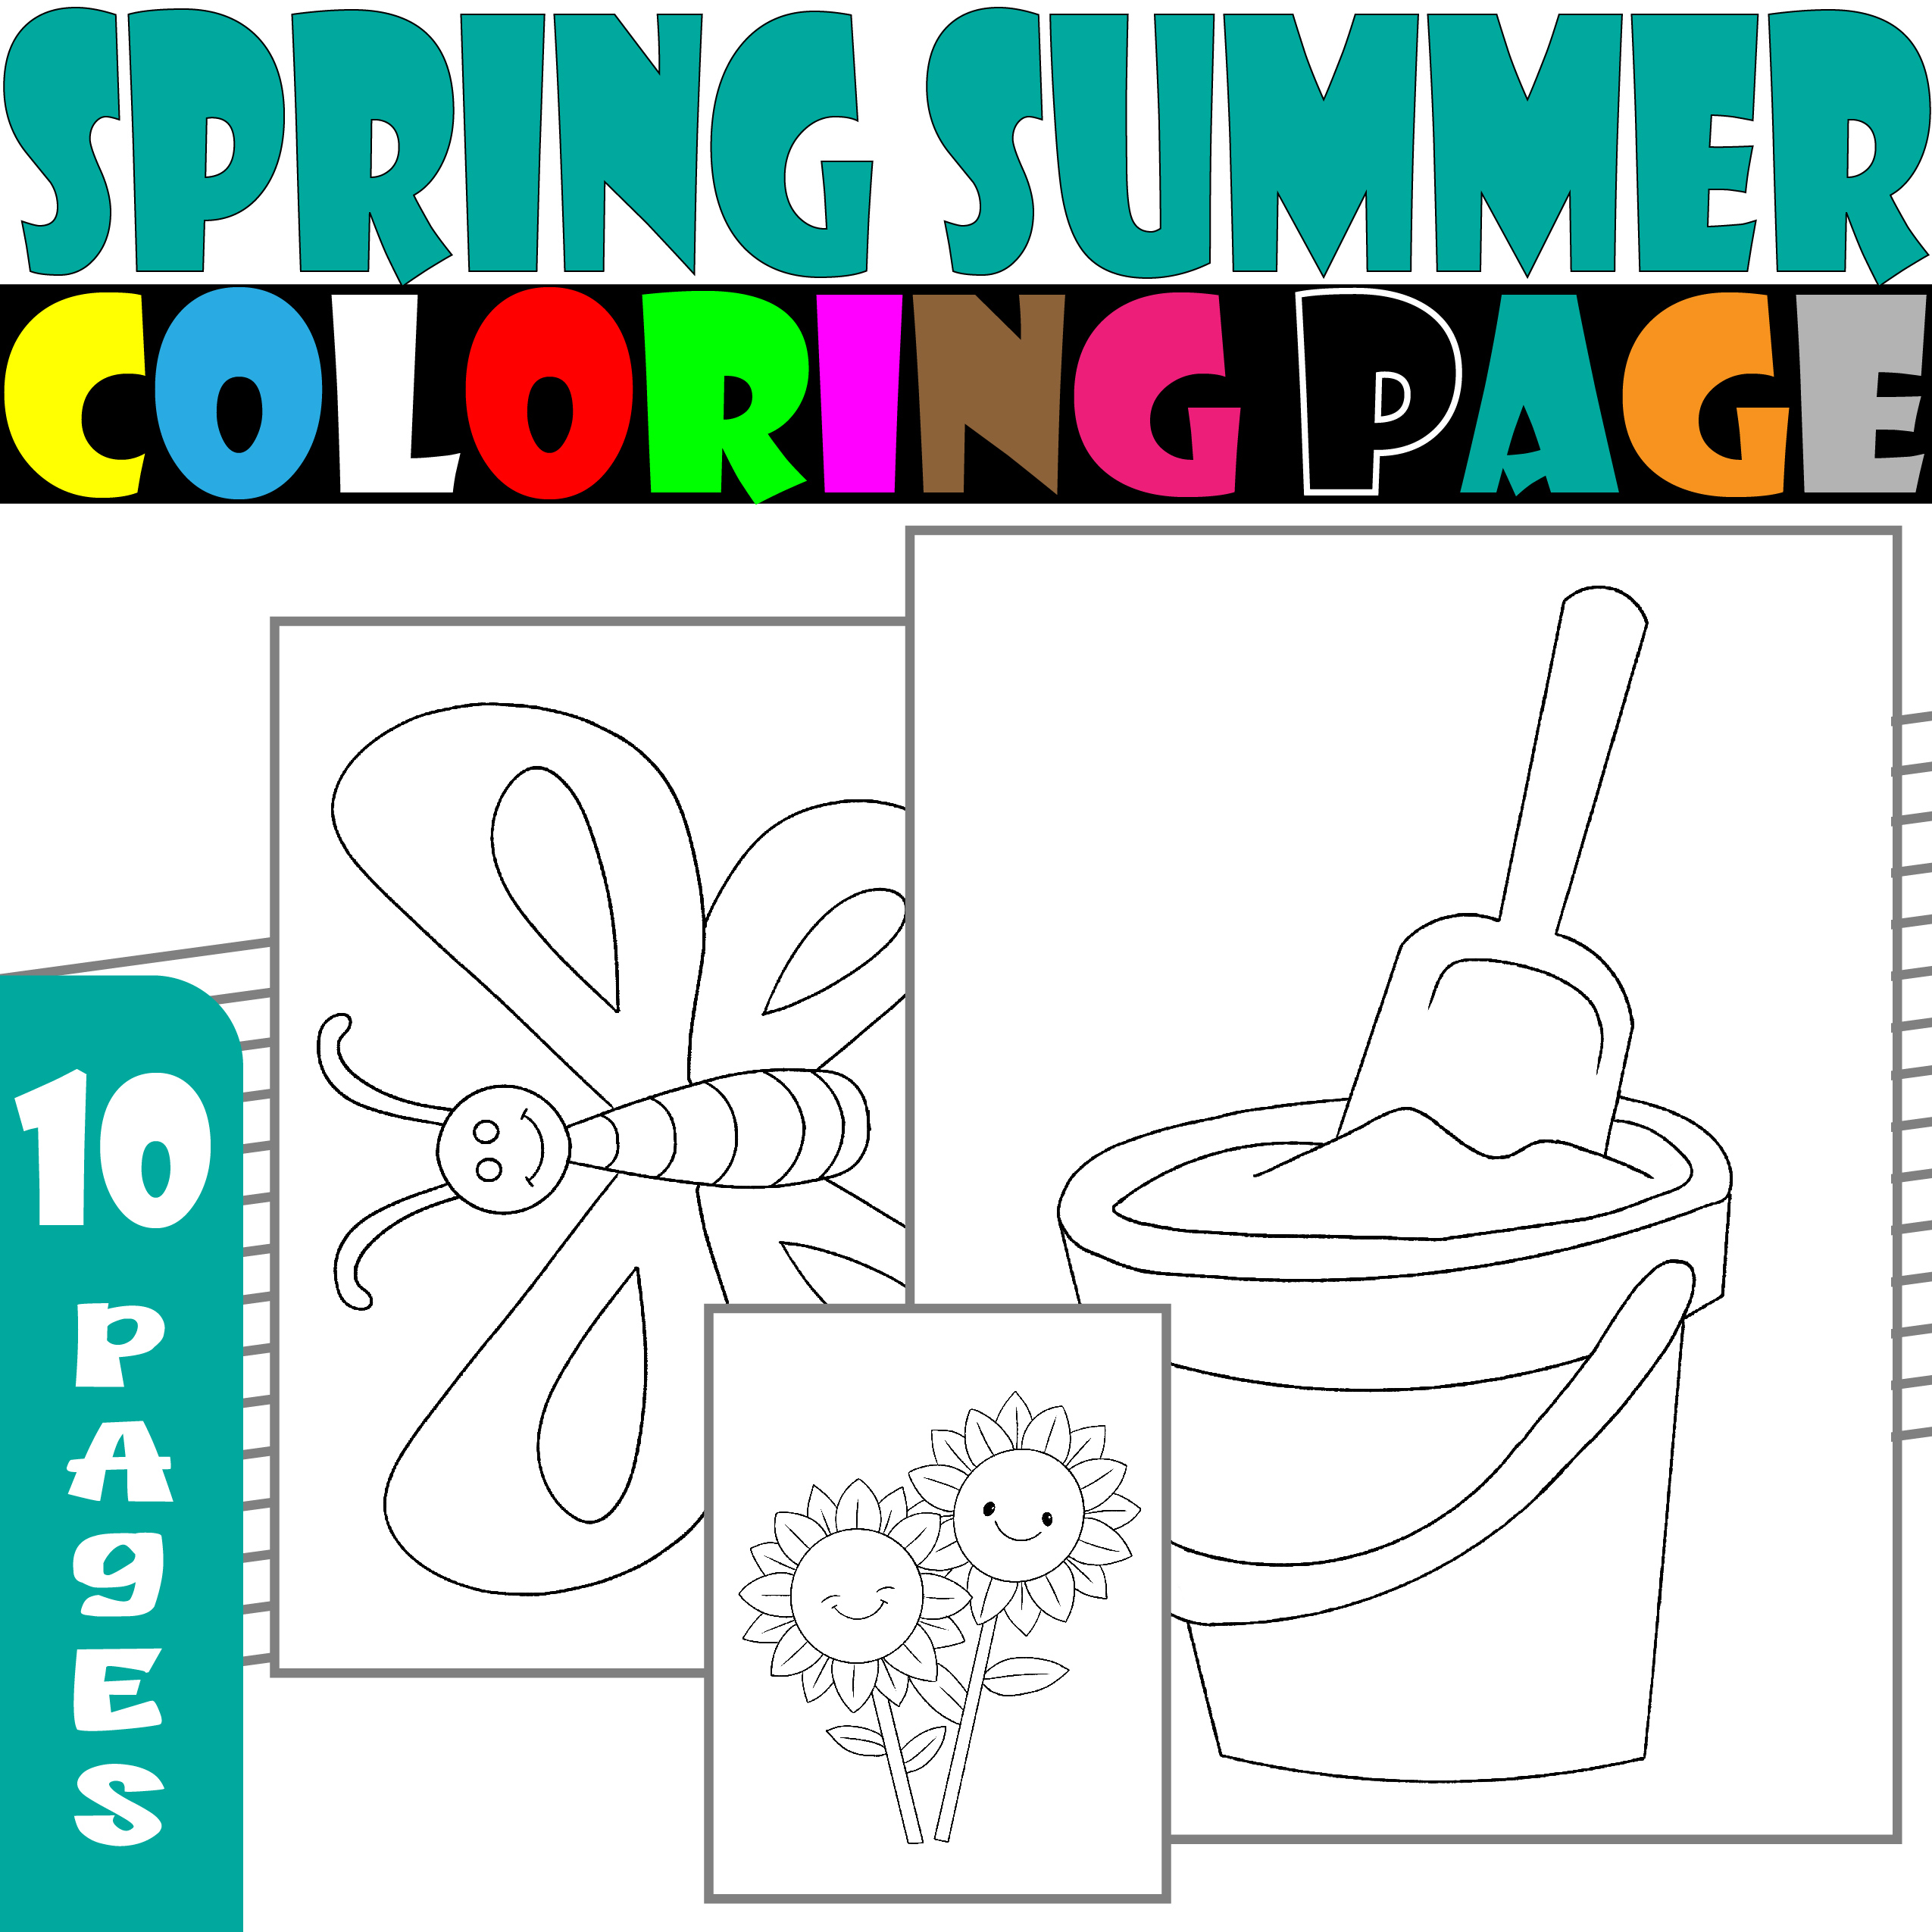 Spring summer sun flowers coloring pages spring summer sun coloring sheets made by teachers